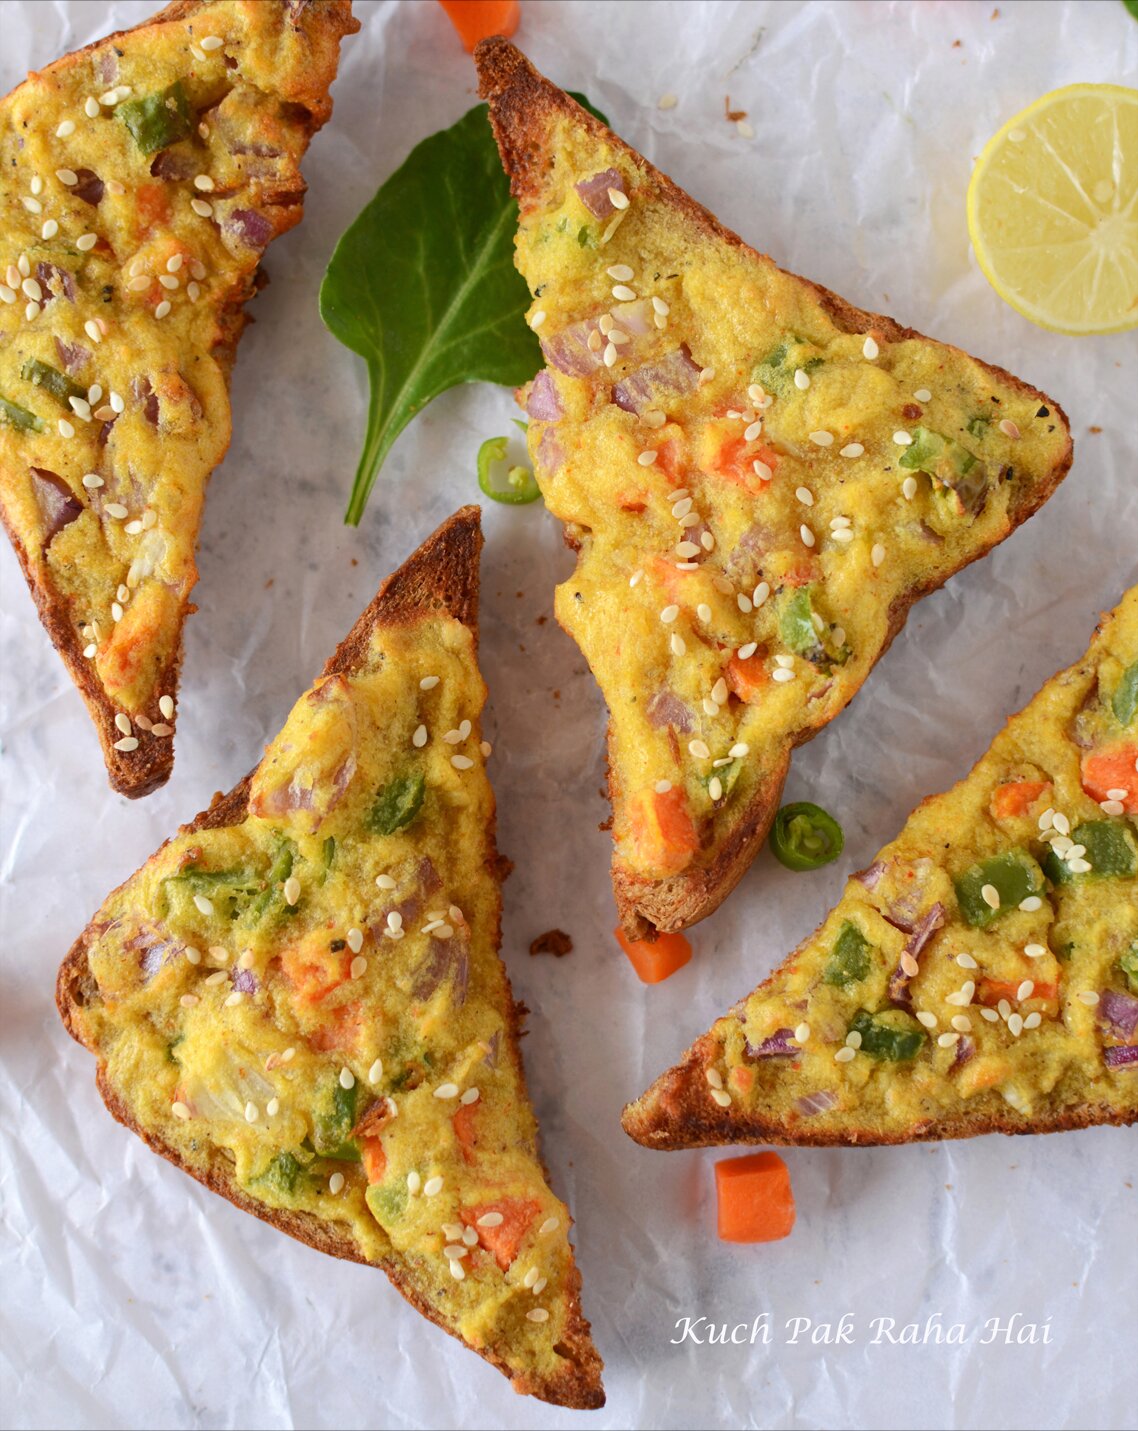 Moong Dal Toast or Lentil Toast made in air fryer